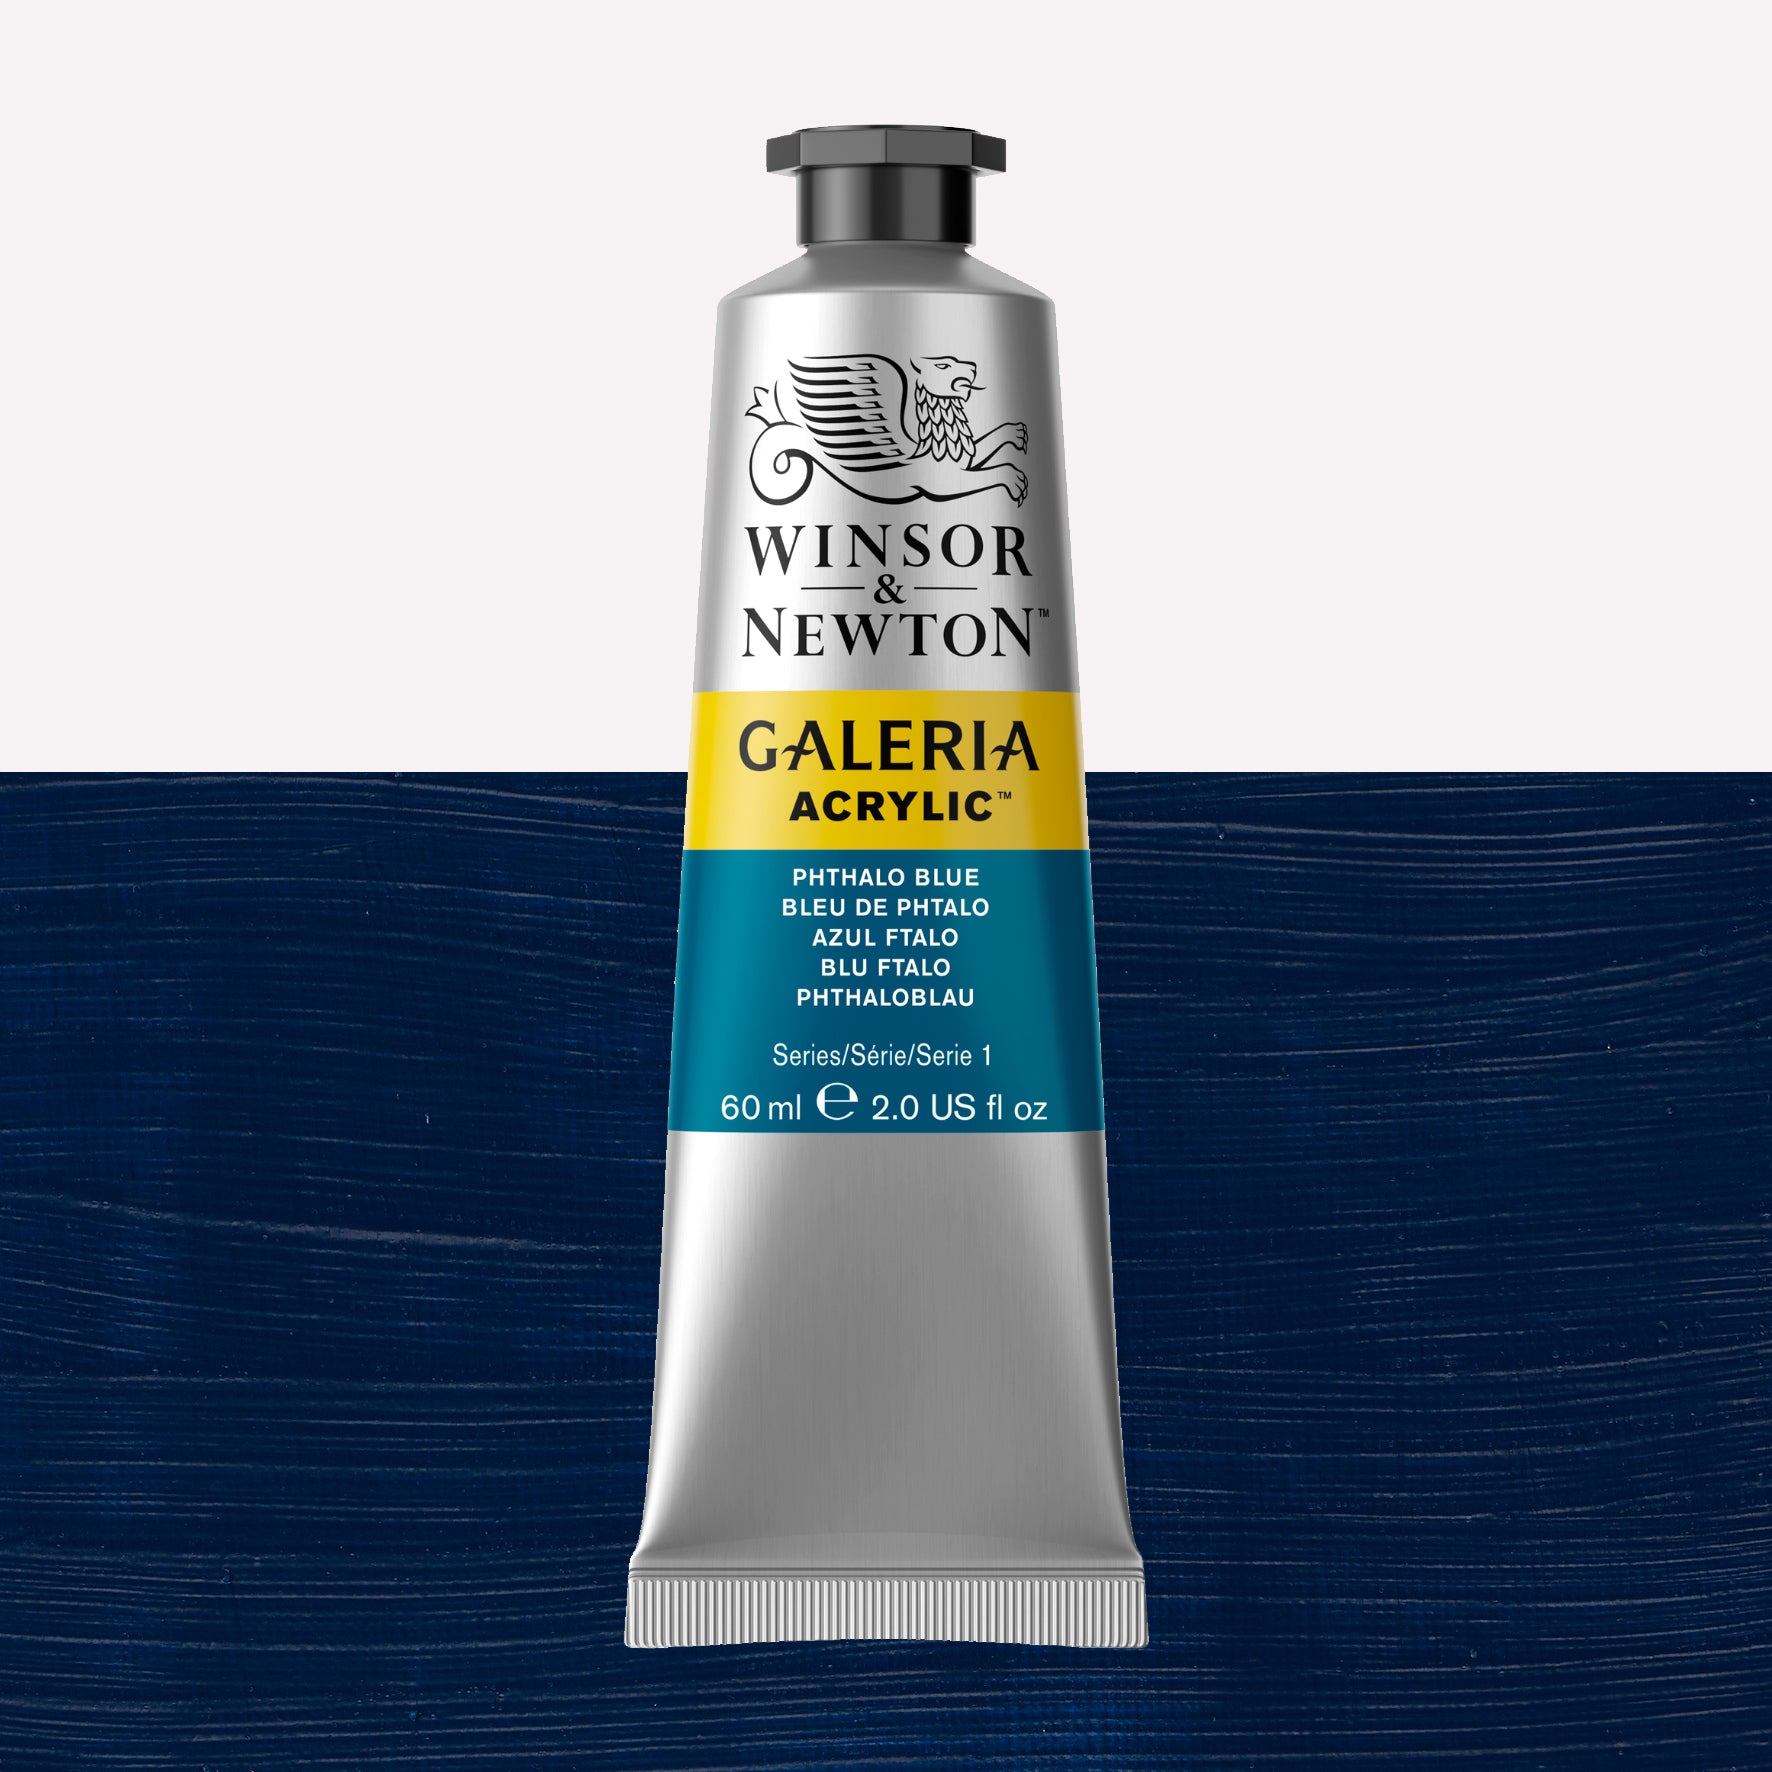 A 60ml tube of vibrant Galeria Acrylic paint in the shade Phthalo Blue Hue. This professional-quality paint is packaged in a silver tube with a black lid. Made by Winsor and Newton.